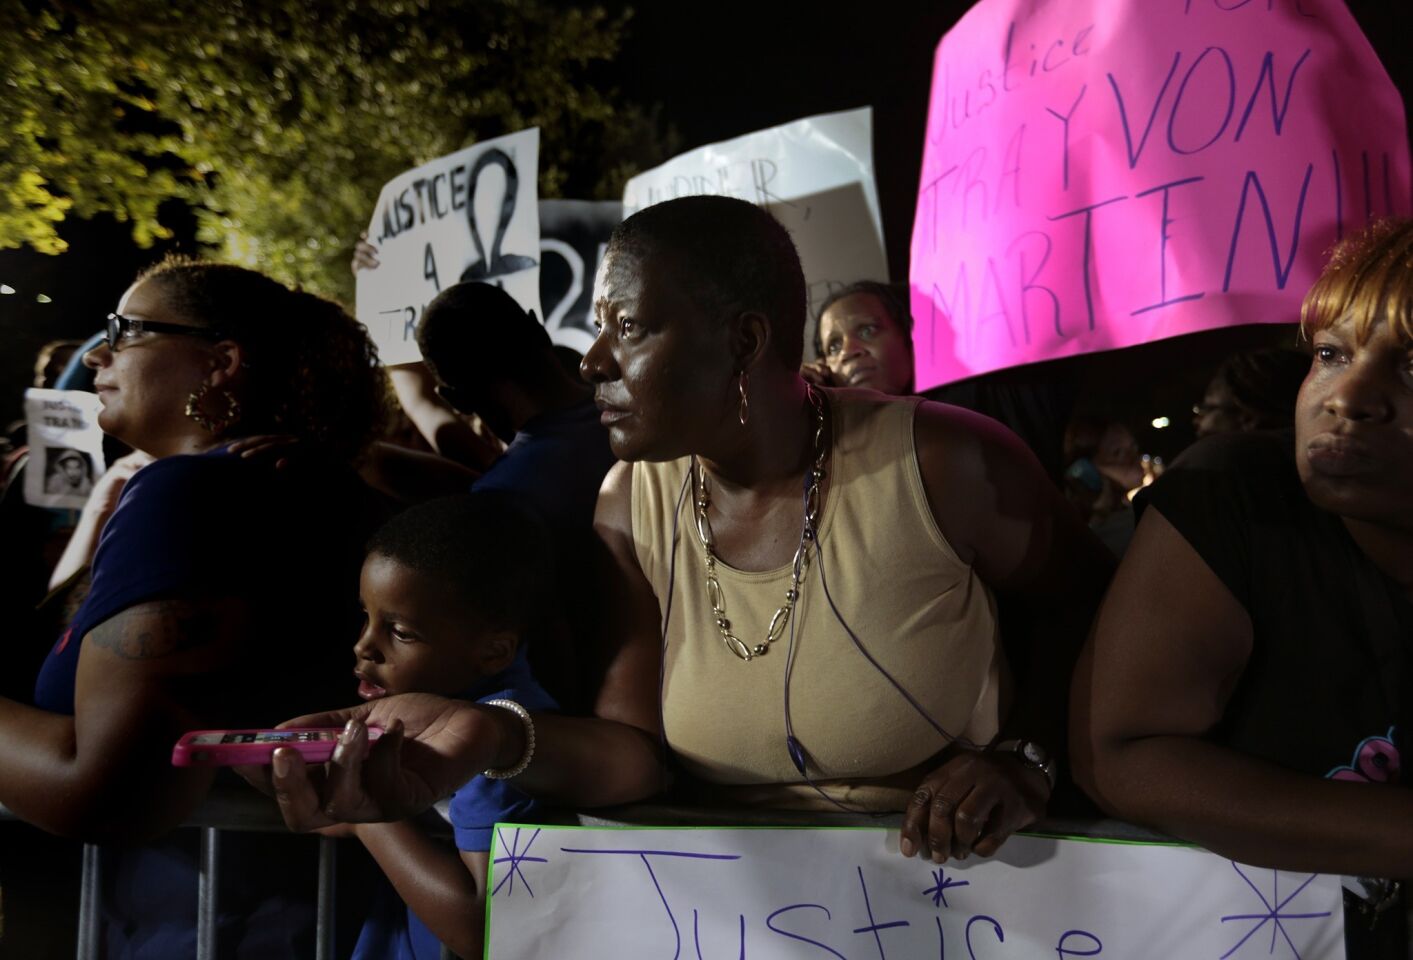 People gathered in Sanford, Fla., to support Trayvon Martin's family use smartphones to listen as the not-guilty verdict for George Zimmerman is read in court.